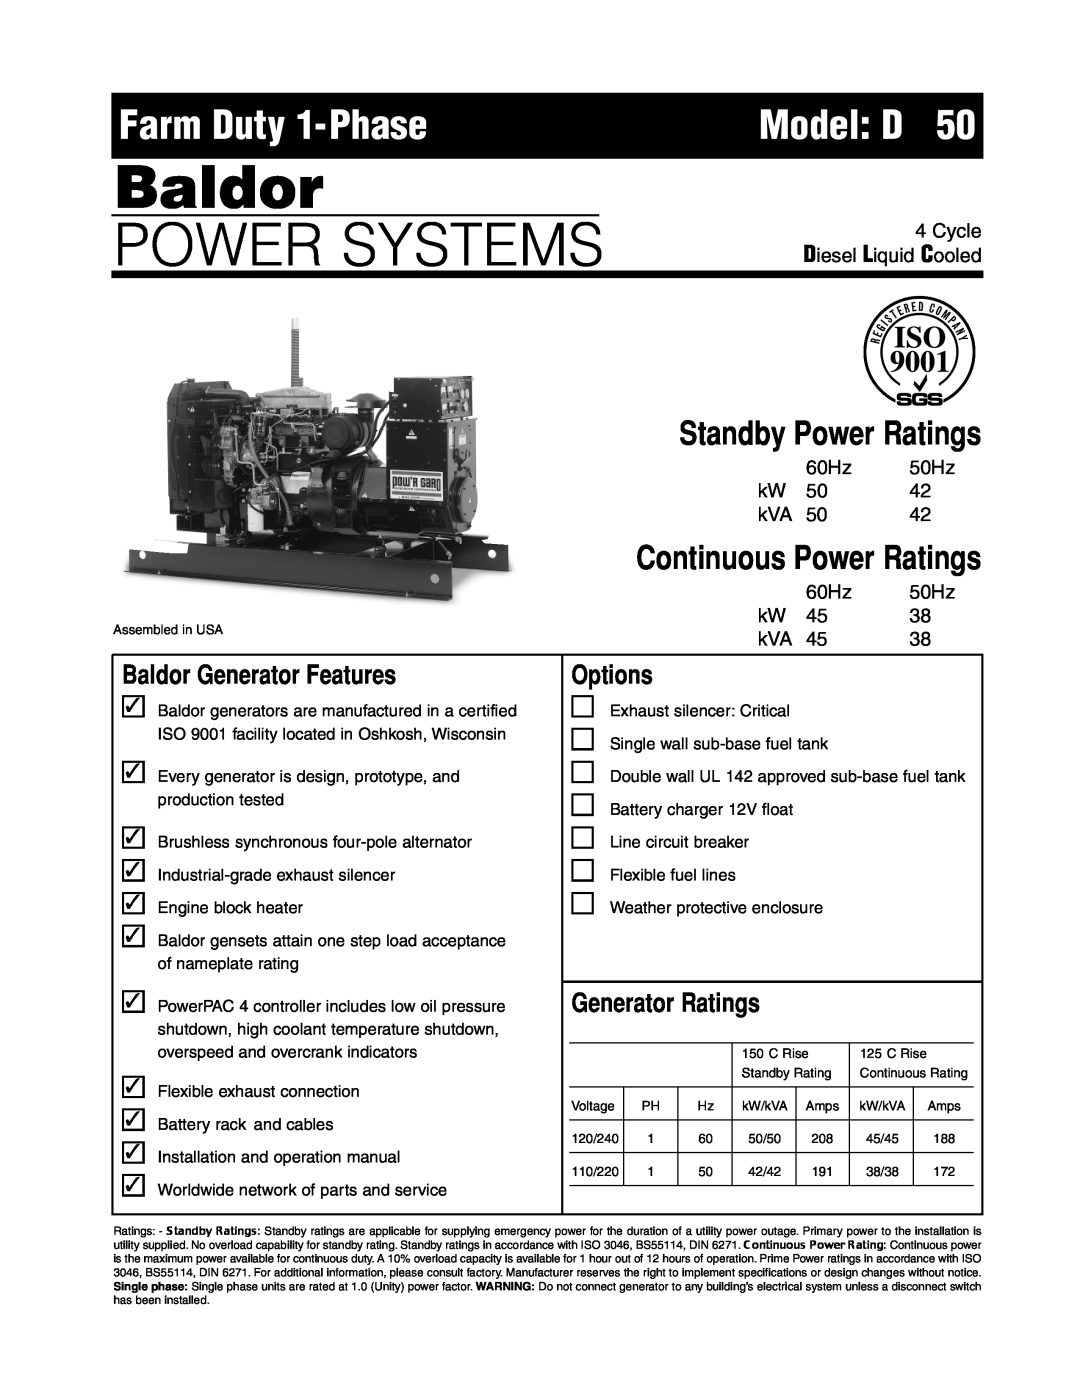 Baldor ISO9001 Model D50, Baldor, Power Systems, Farm Duty 1-Phase, Standby Power Ratings, Continuous Power Ratings, 60Hz 